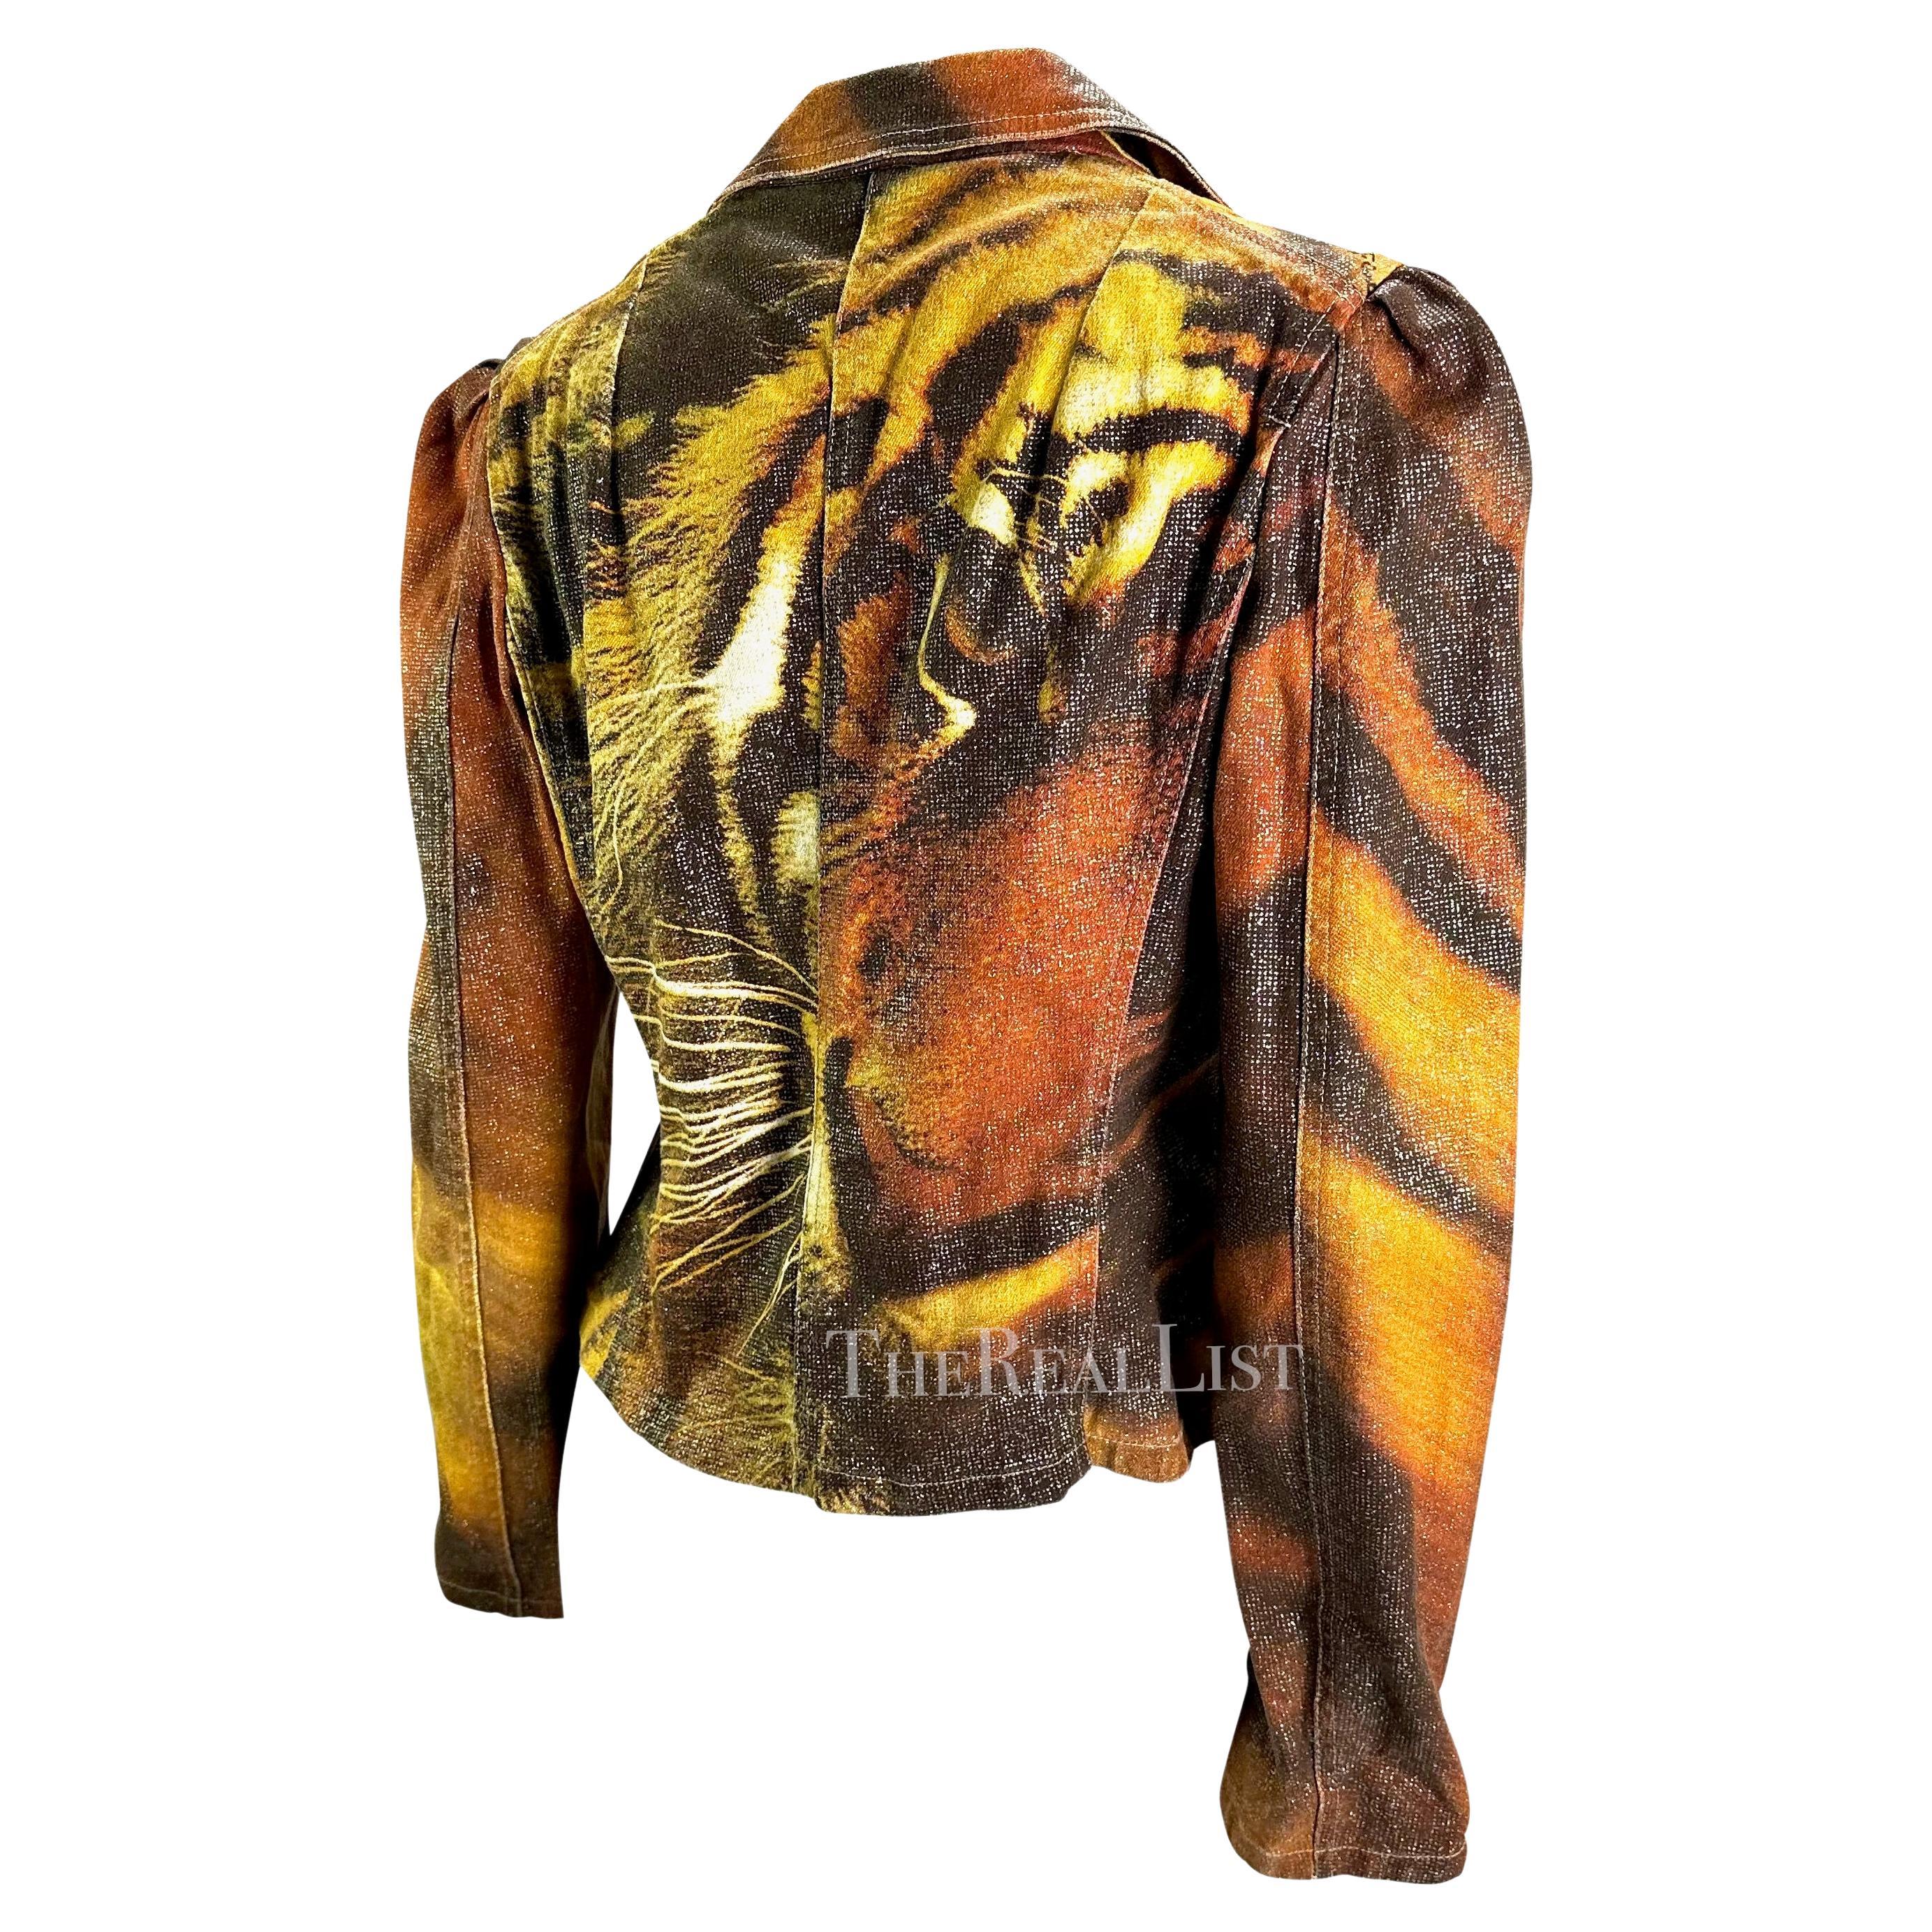 Presenting a Roberto Cavalli tiger blazer. From the Fall/Winter 2000 collection, this jacket boldly features Cavalli’s iconic tiger pattern. Featuring a cropped body, button closure, and slightly puffy shoulders this jacket is a Y2K dream. Check out